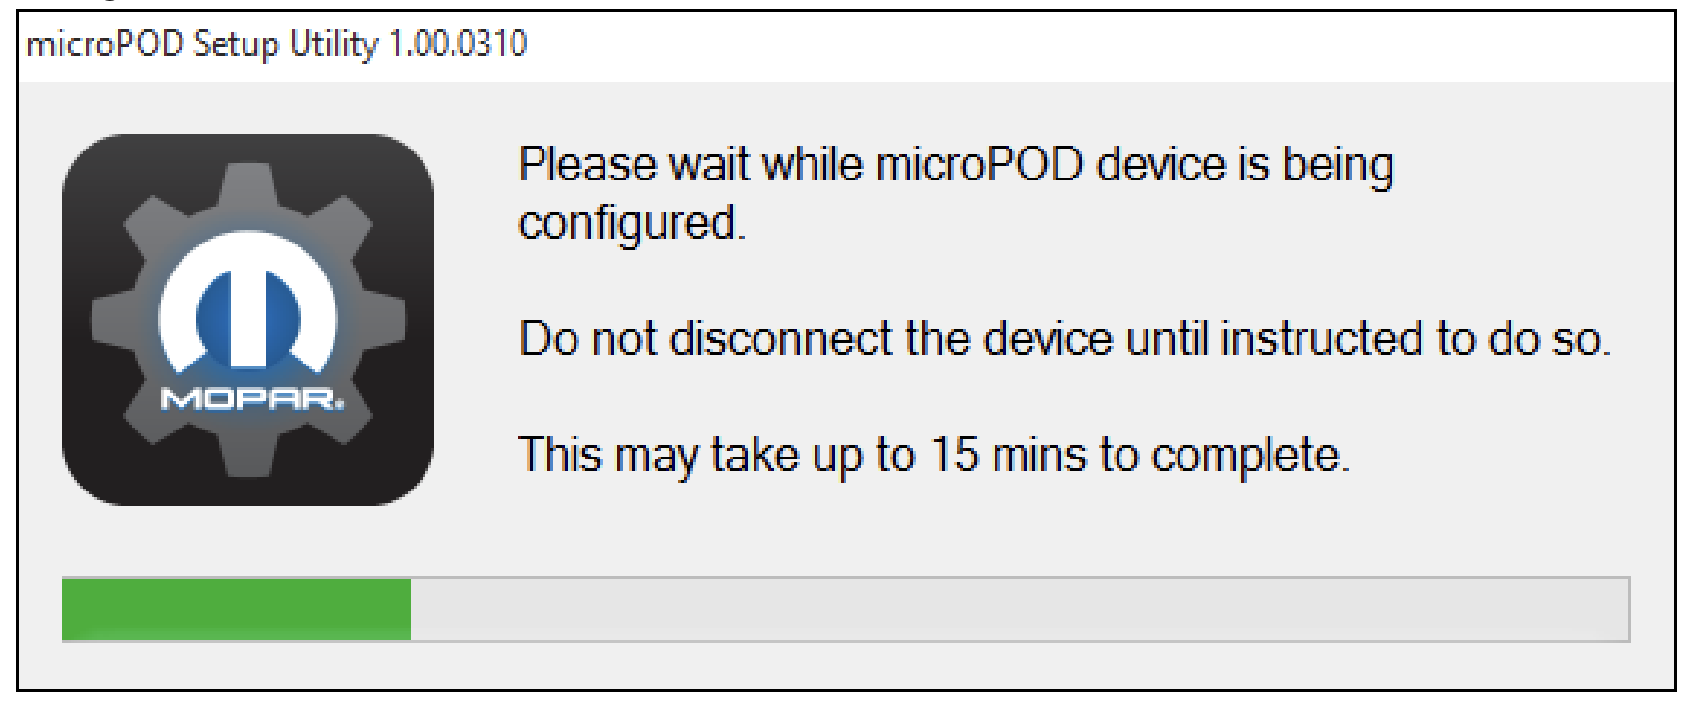 microPod device is being configured